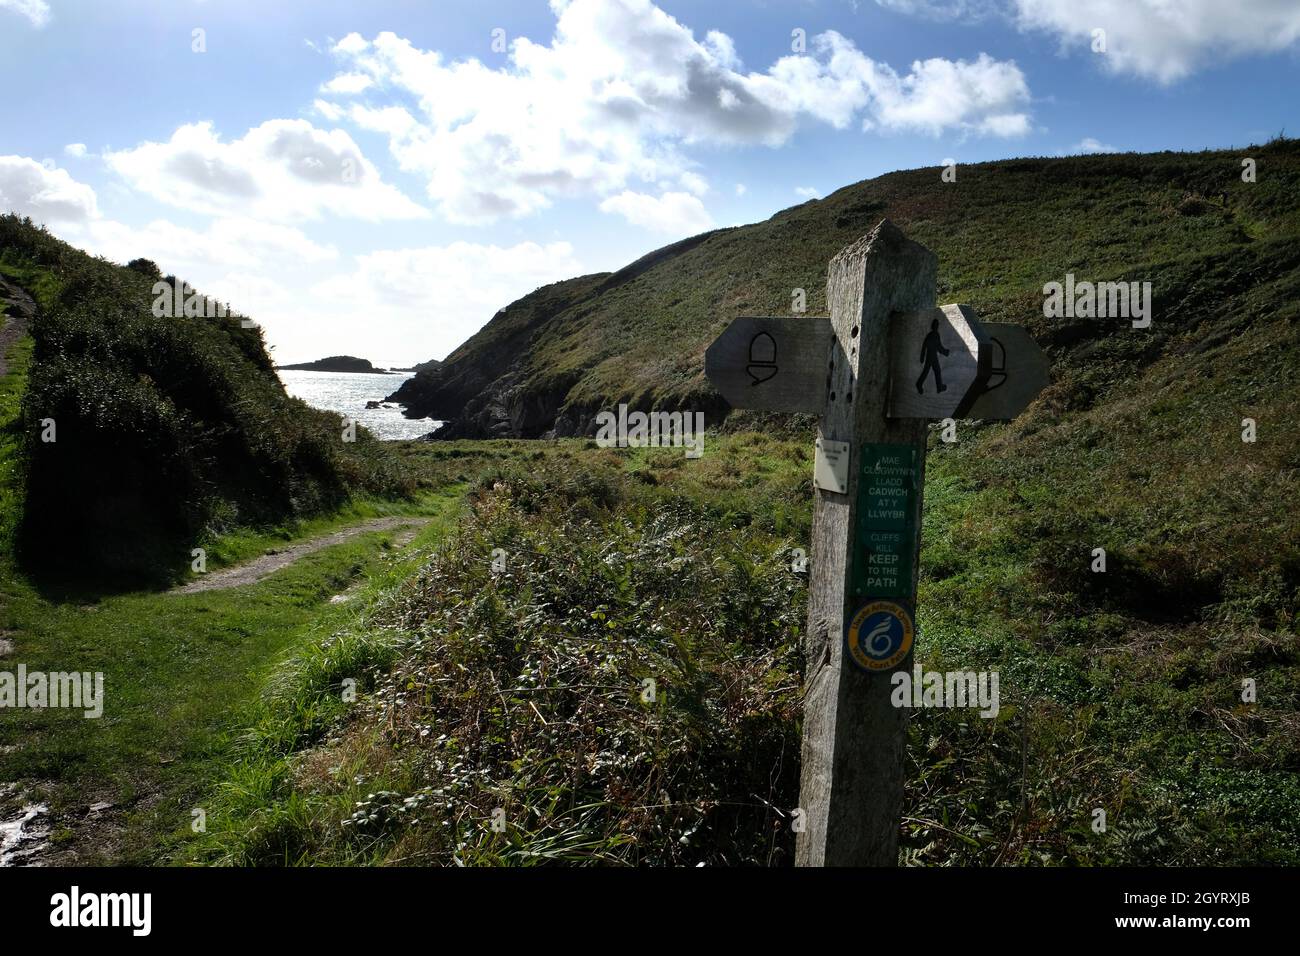 Footpath signpost above Caer Bwdy Bay on the Pembrokeshire Coastal Path. Ynys Penpleidian island can be seen offshore. Wales, UK Stock Photo